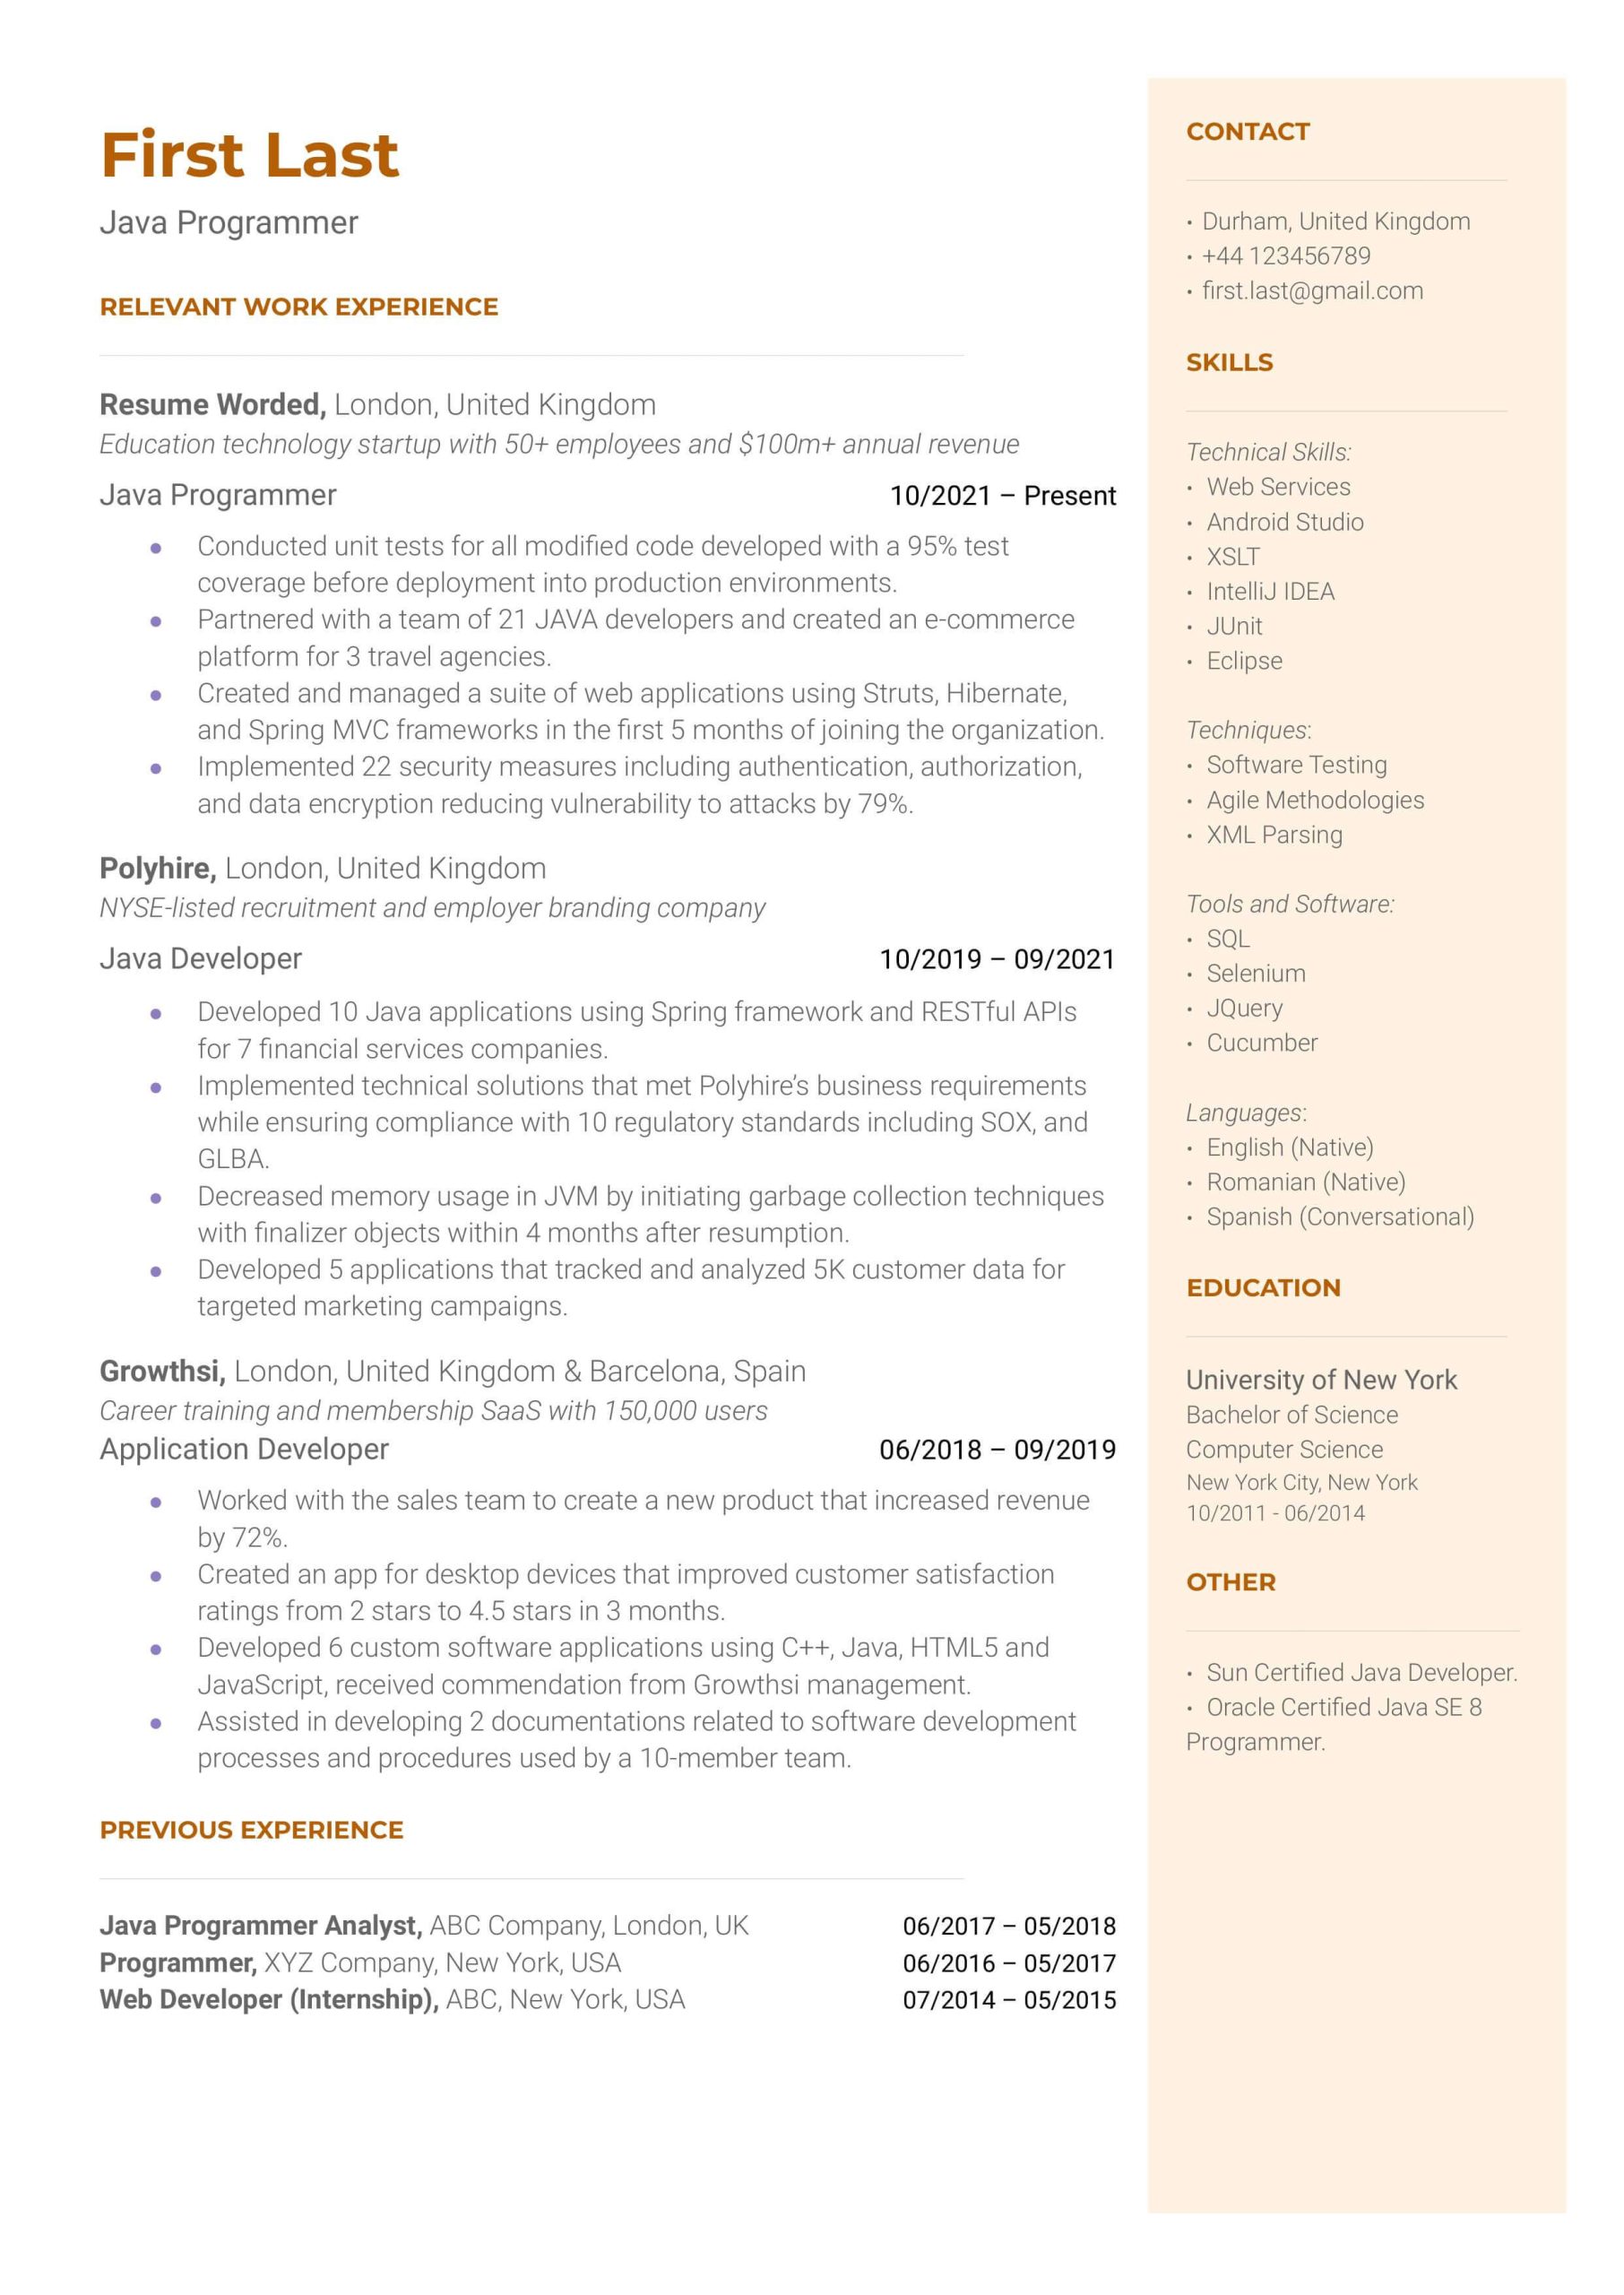 Resume Samples Java Programming Nested Loops Data Structures and Algorithms 10 Programmer Resume Examples for 2022 Resume Worded